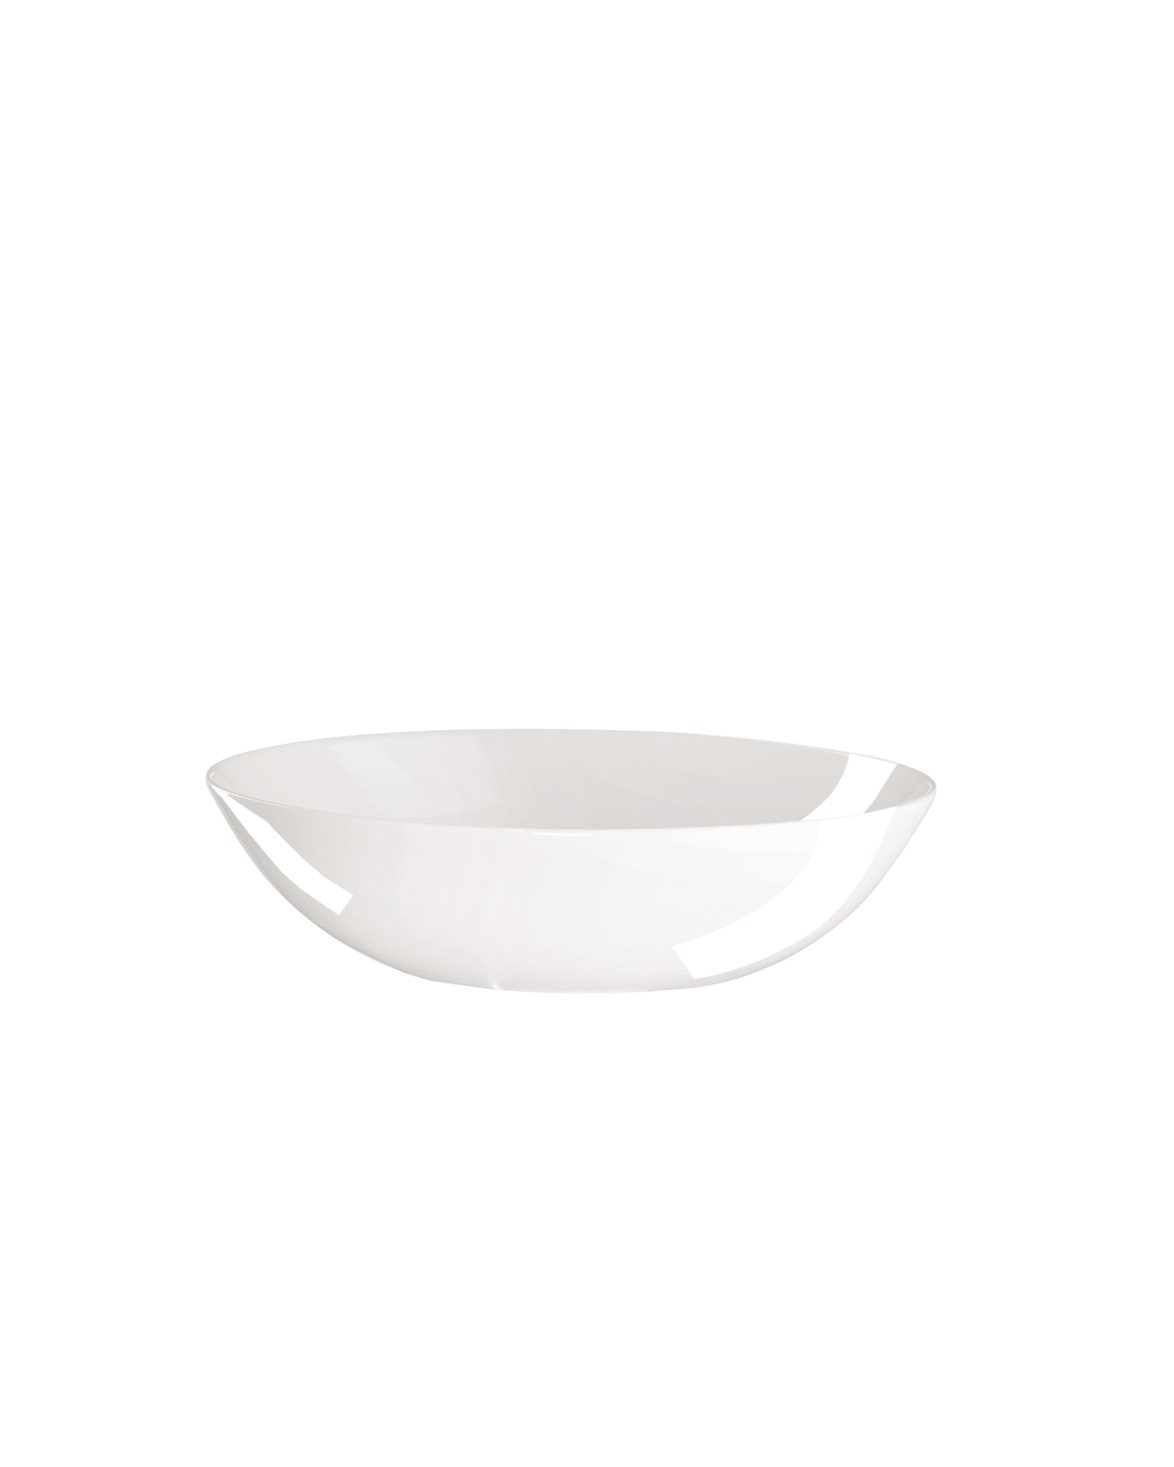 Asa Selection Coupe Gourmet Plate White